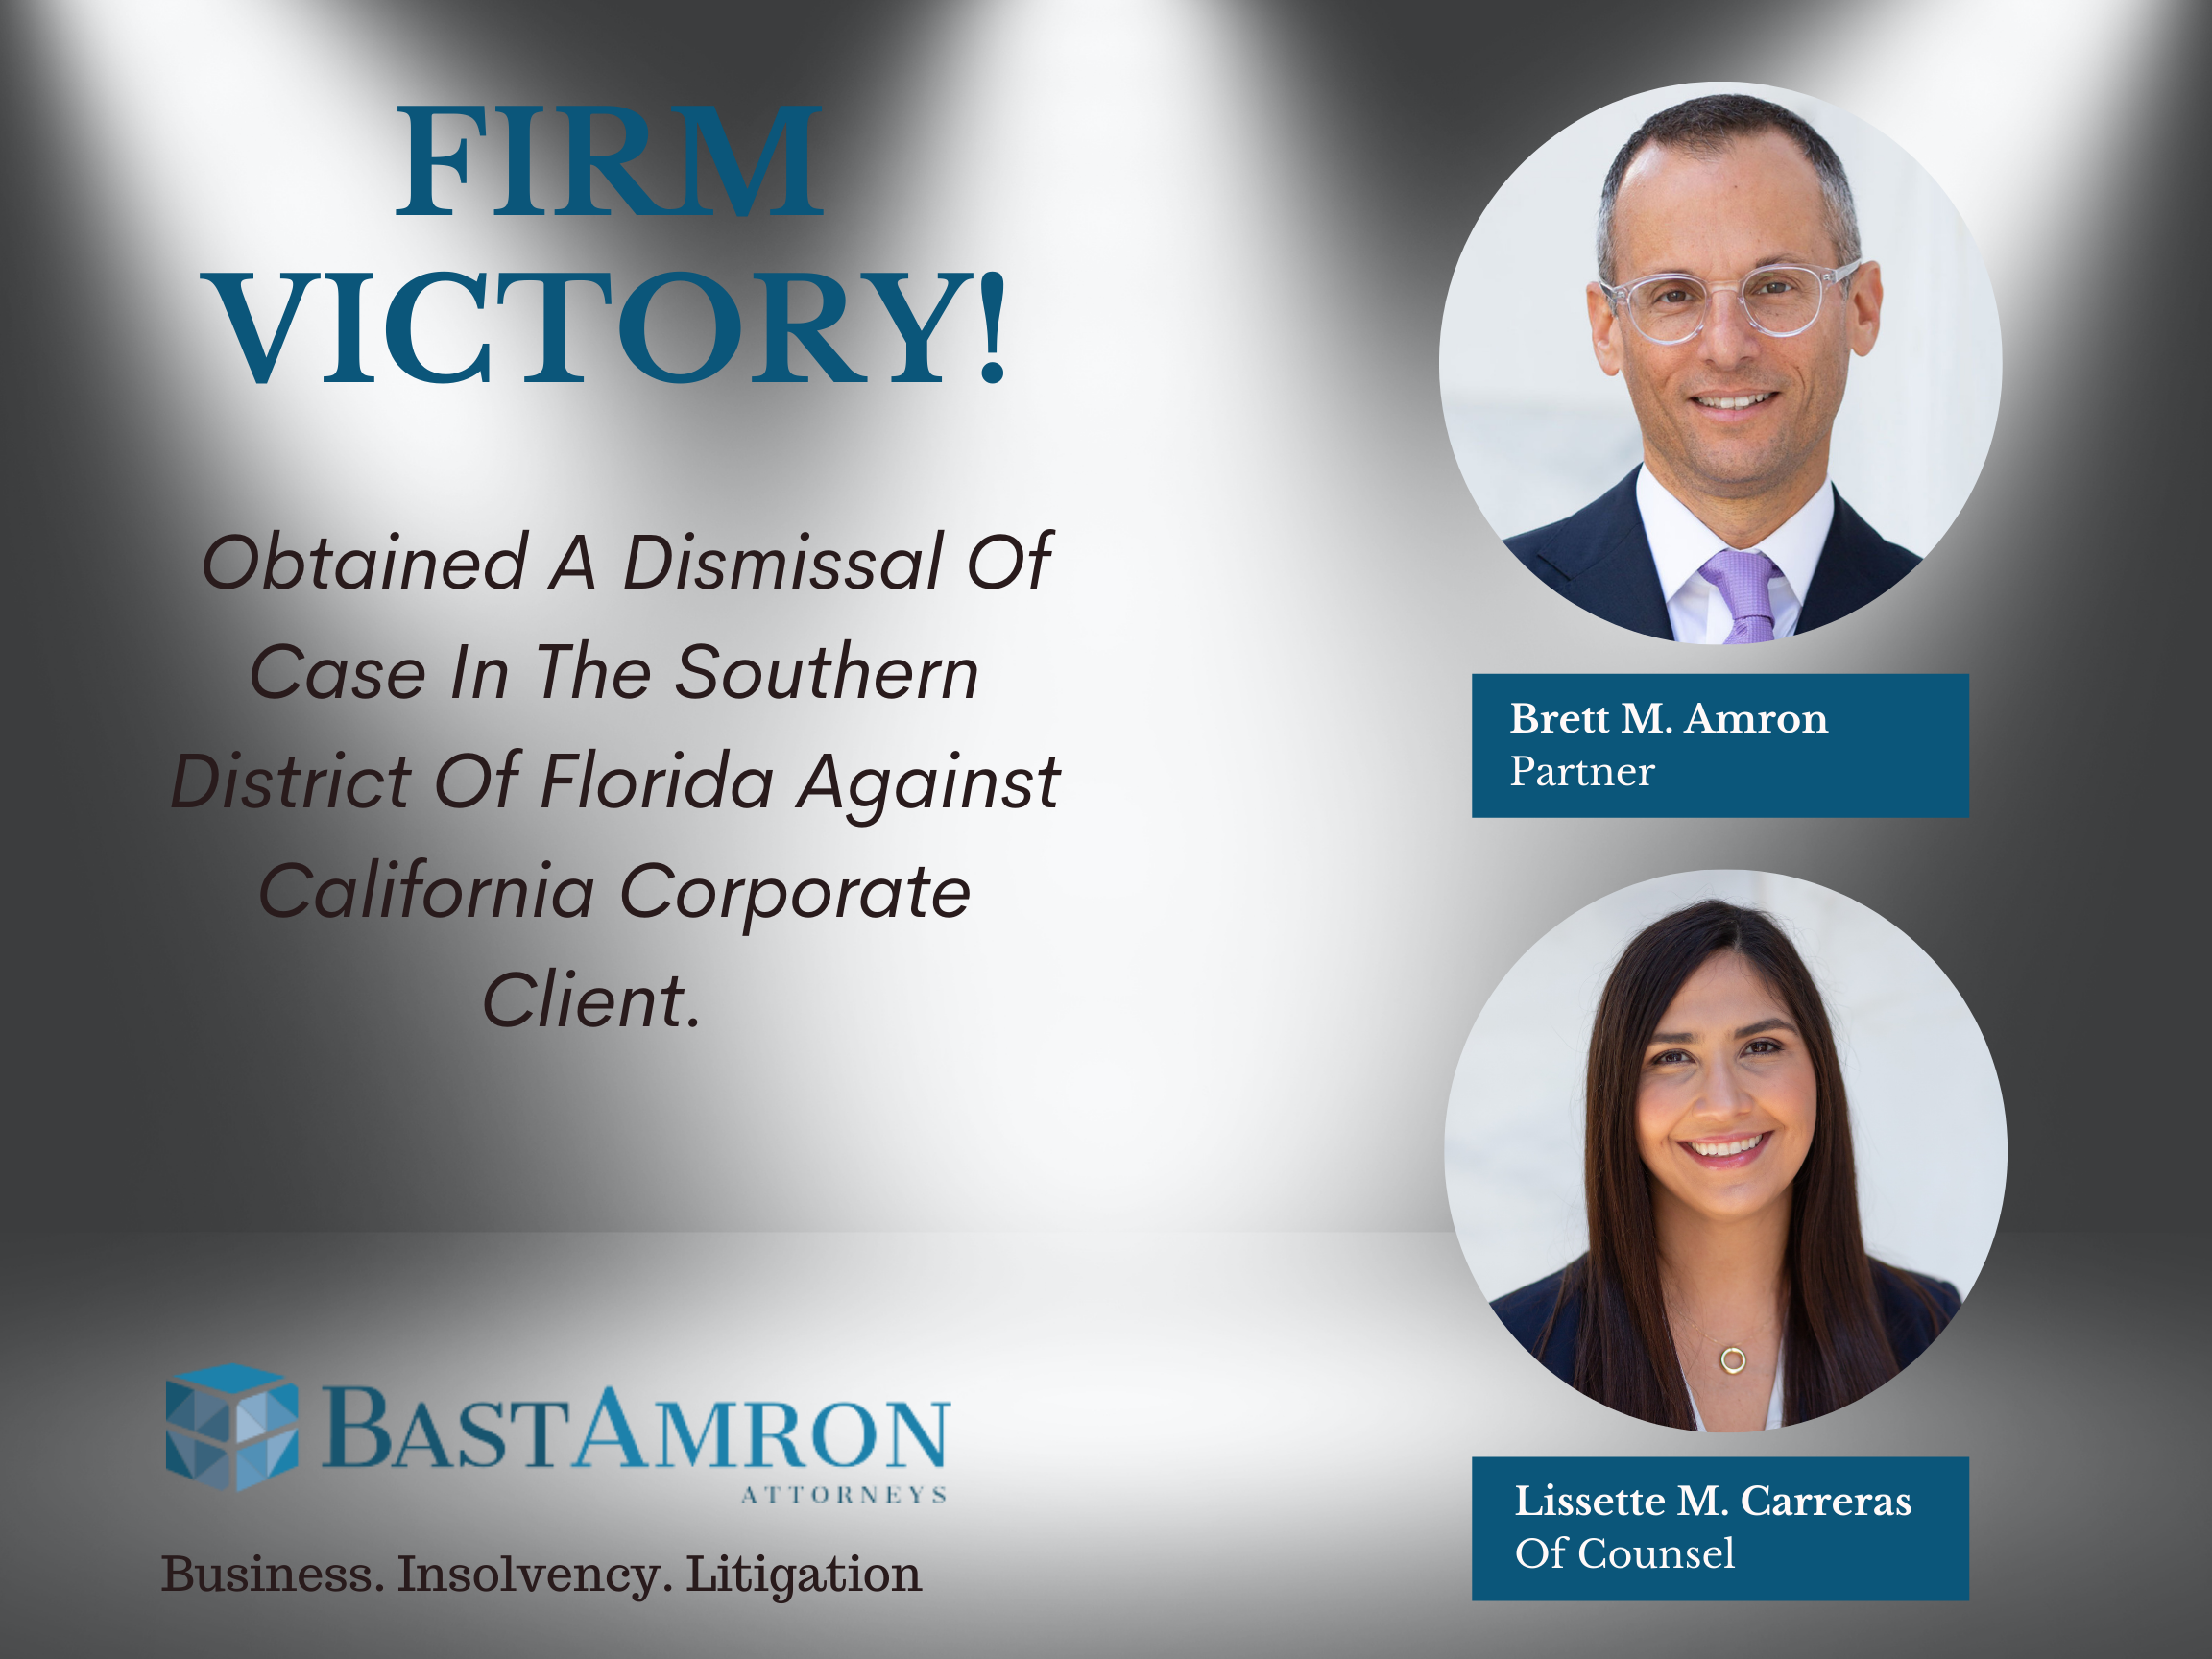 BAST AMRON ATTORNEYS OBTAINED A DISMISSAL OF CASE IN THE SOUTHERN DISTRICT OF FLORIDA AGAINST CALIFORNIA CORPORATE CLIENT.